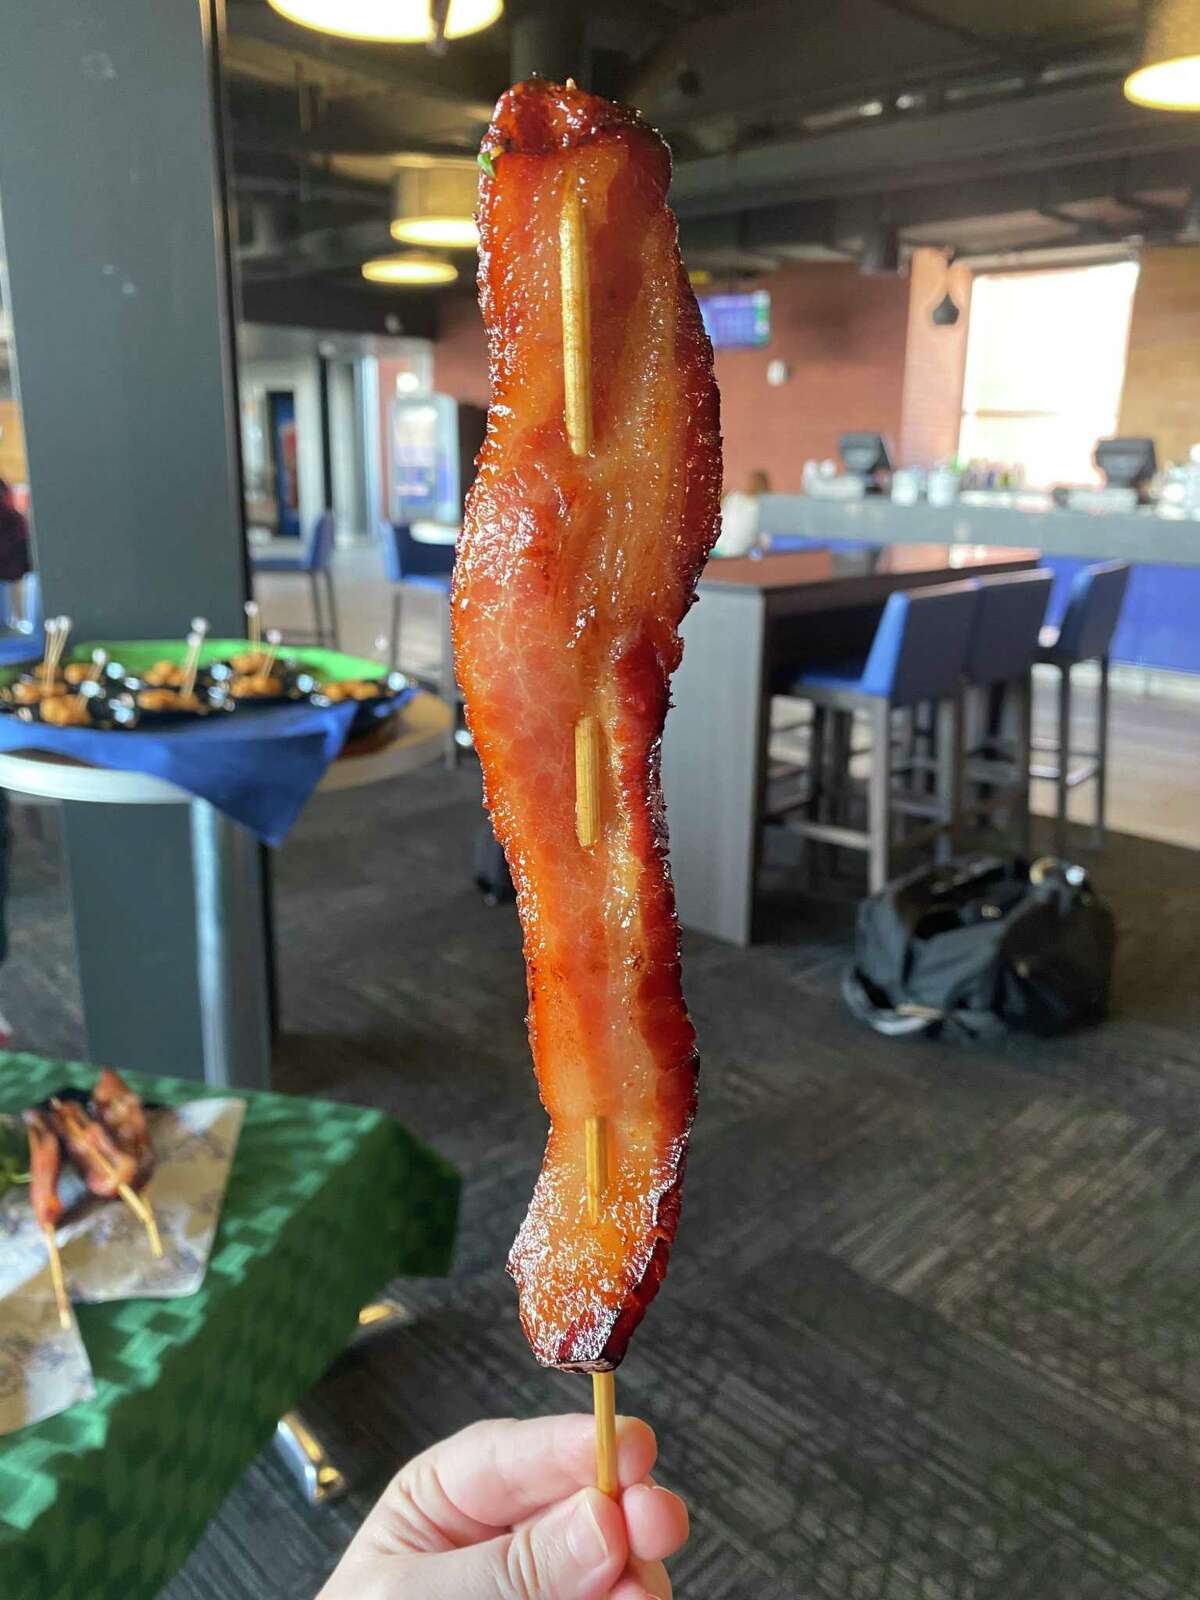 Bacon steaks ($7.75) “Basically a large slab of bacon on a stick,” Patterson said. “Easy to handle when you’re out there watching the game.” The speared bacon is candied, baked with brown and granulated sugars and seared off on a flattop grill.